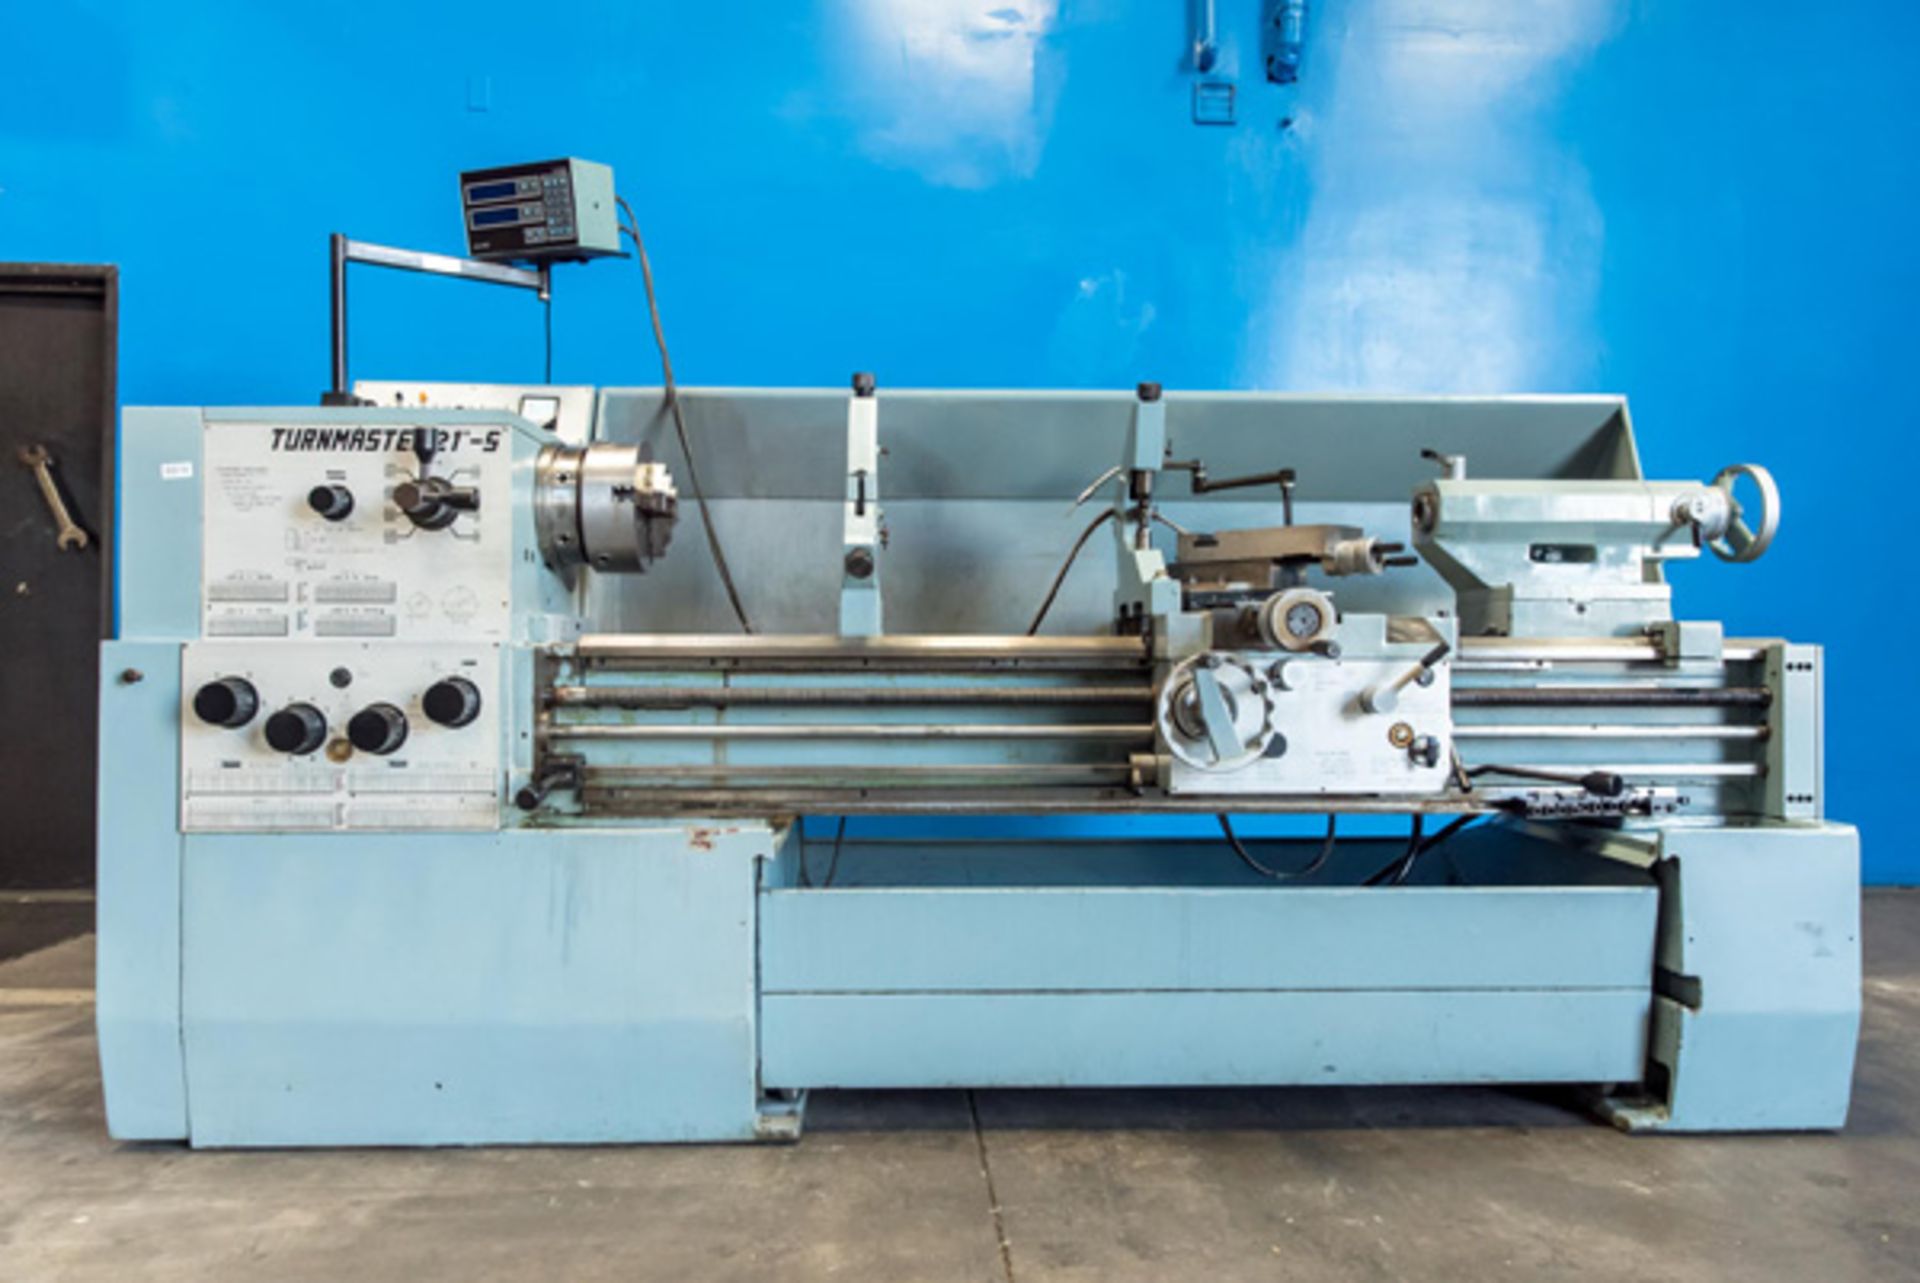 1991 Turnmaster Engine Lathe, 21"/29" x 70", Mdl: 21 S, S/N: 1991193, Located In: Huntington Park,